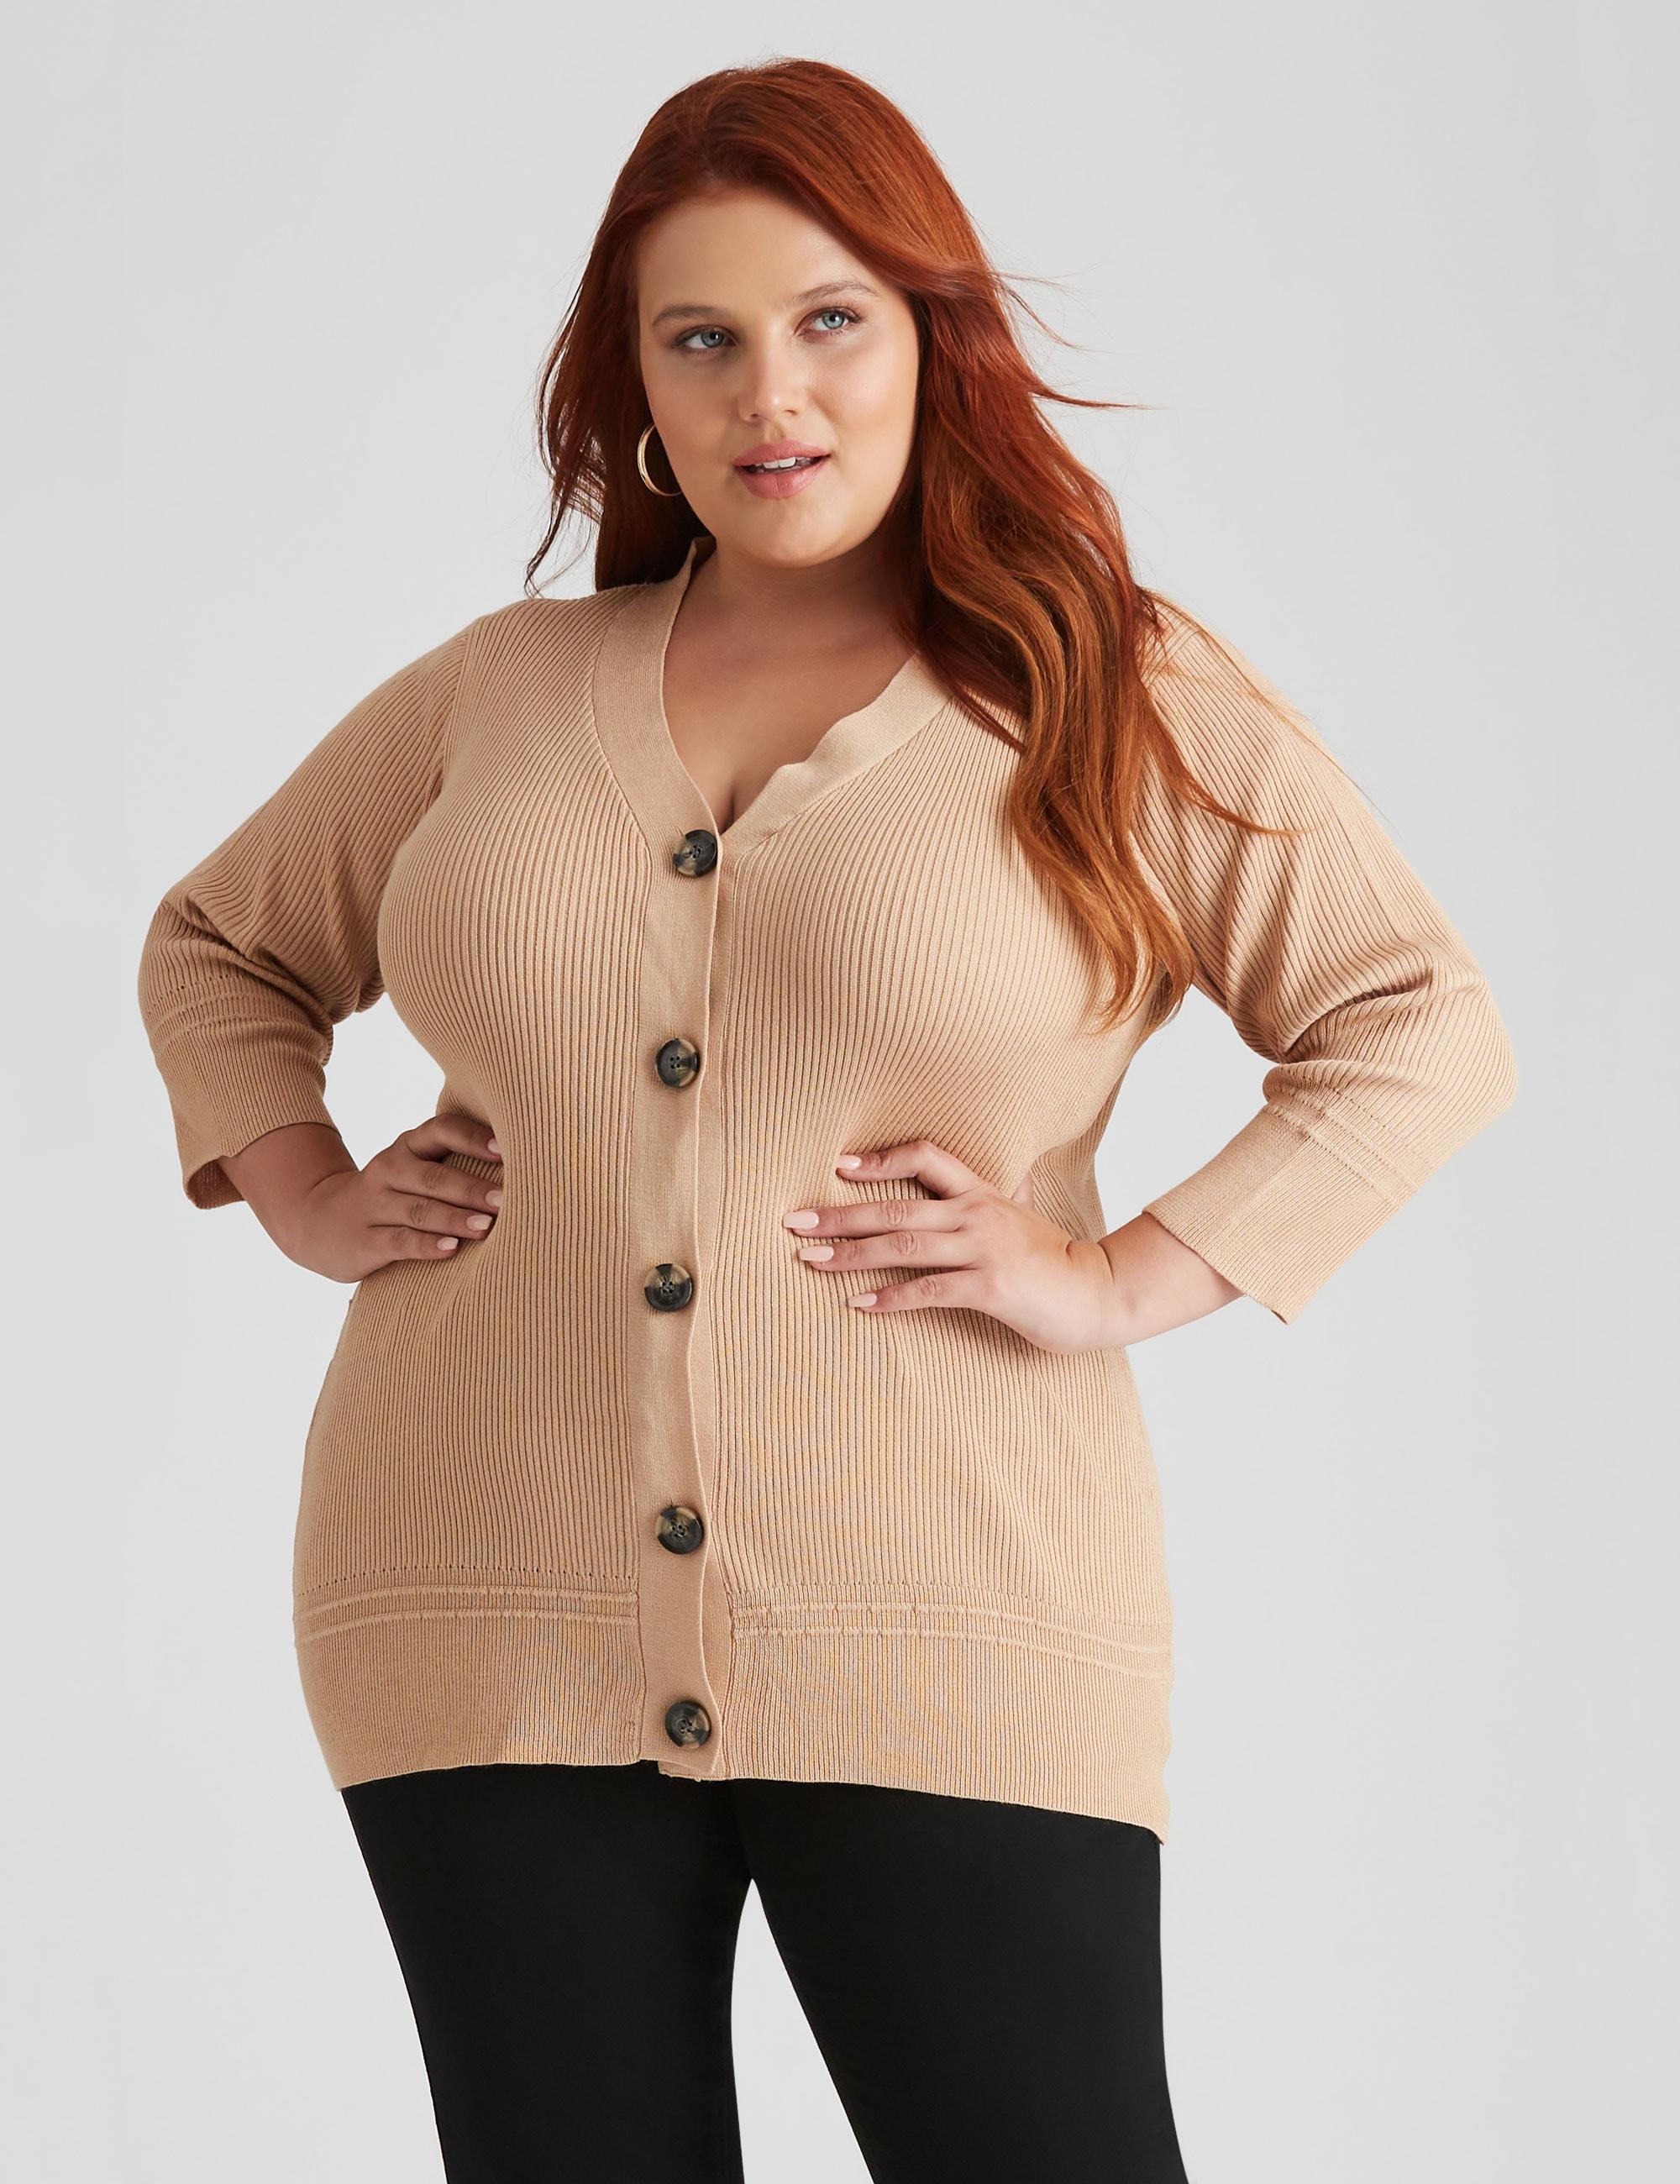 BeMe - Plus Size Womens Jumper Long Winter Cardigan Cardi - Brown Sweater Ribbed - Fitted - Caramel - 3/4 Sleeve - V Neck - Warm Casual Work Wear